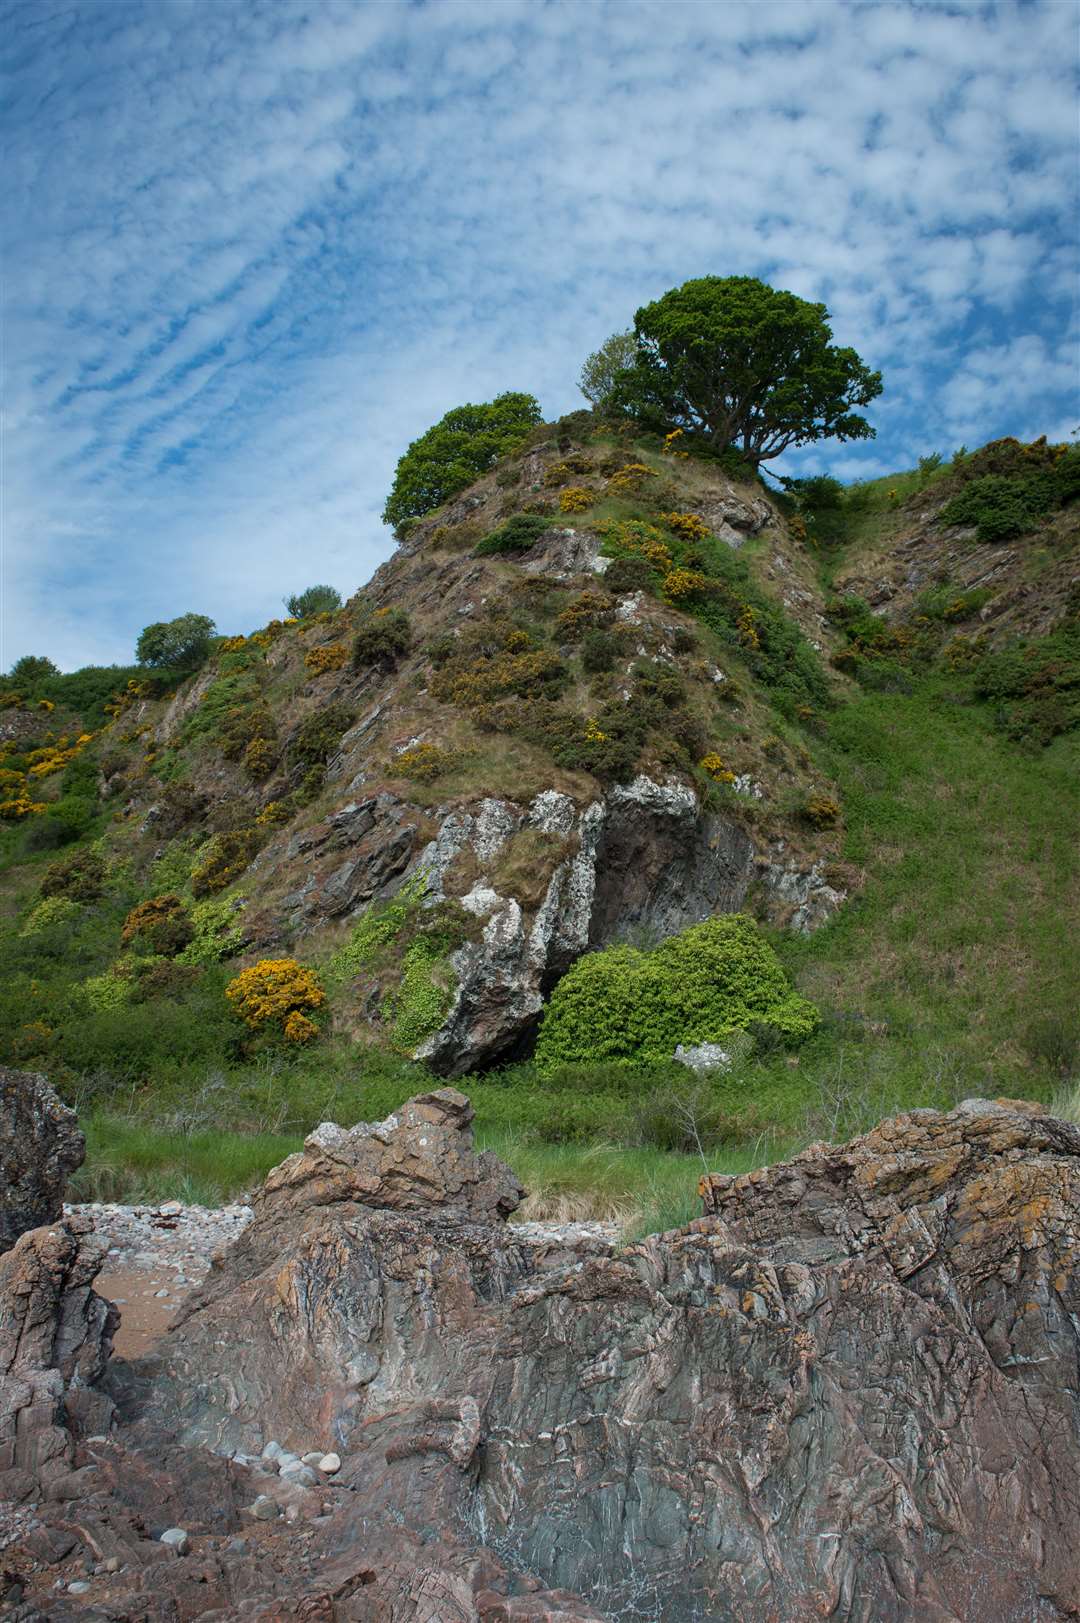 Caves at Rosemarkie were studied in detail to reveal evidence of previous human habitation.